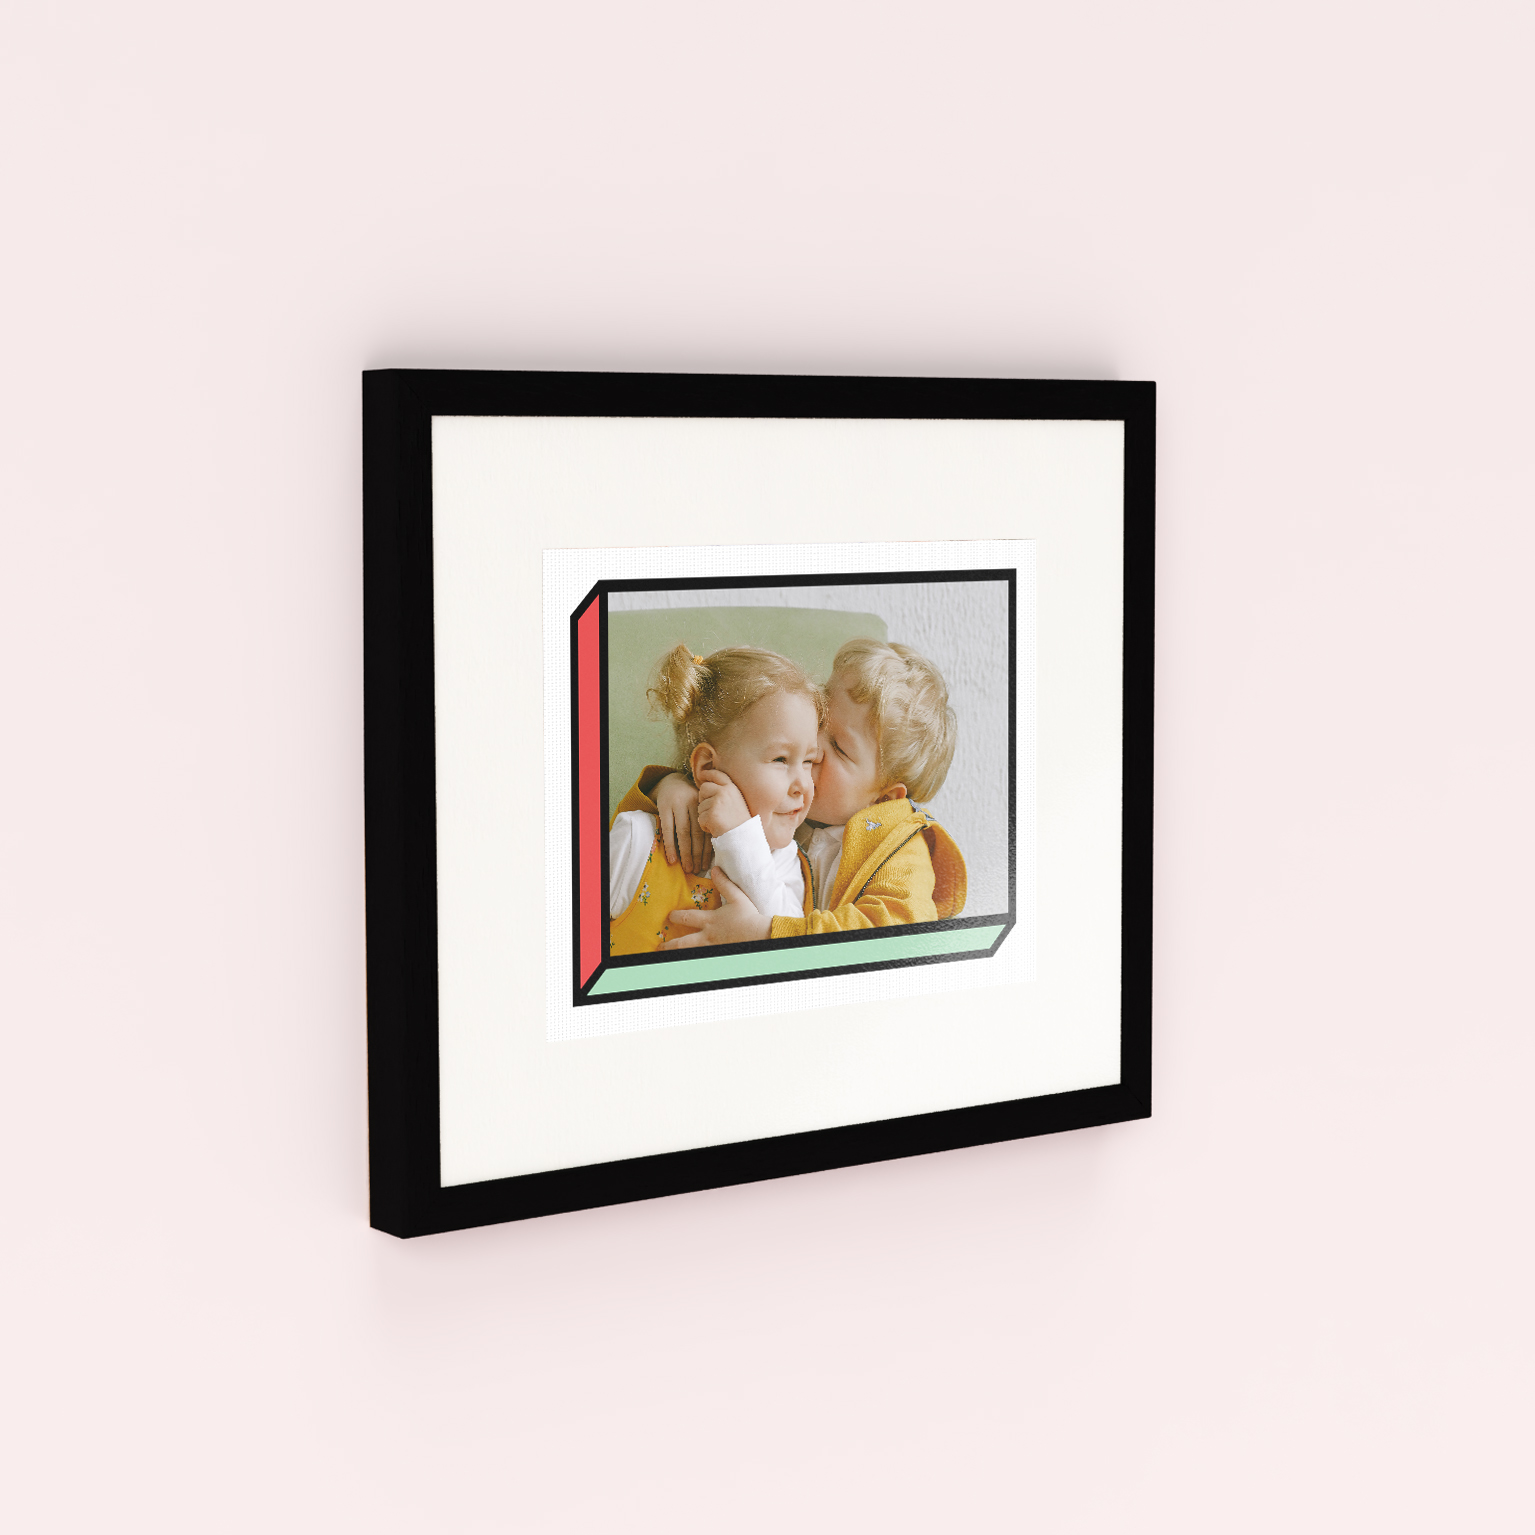 3D Glee Framed Photo Print - Immerse yourself in joy, preserving cherished memories with a 3D effect.